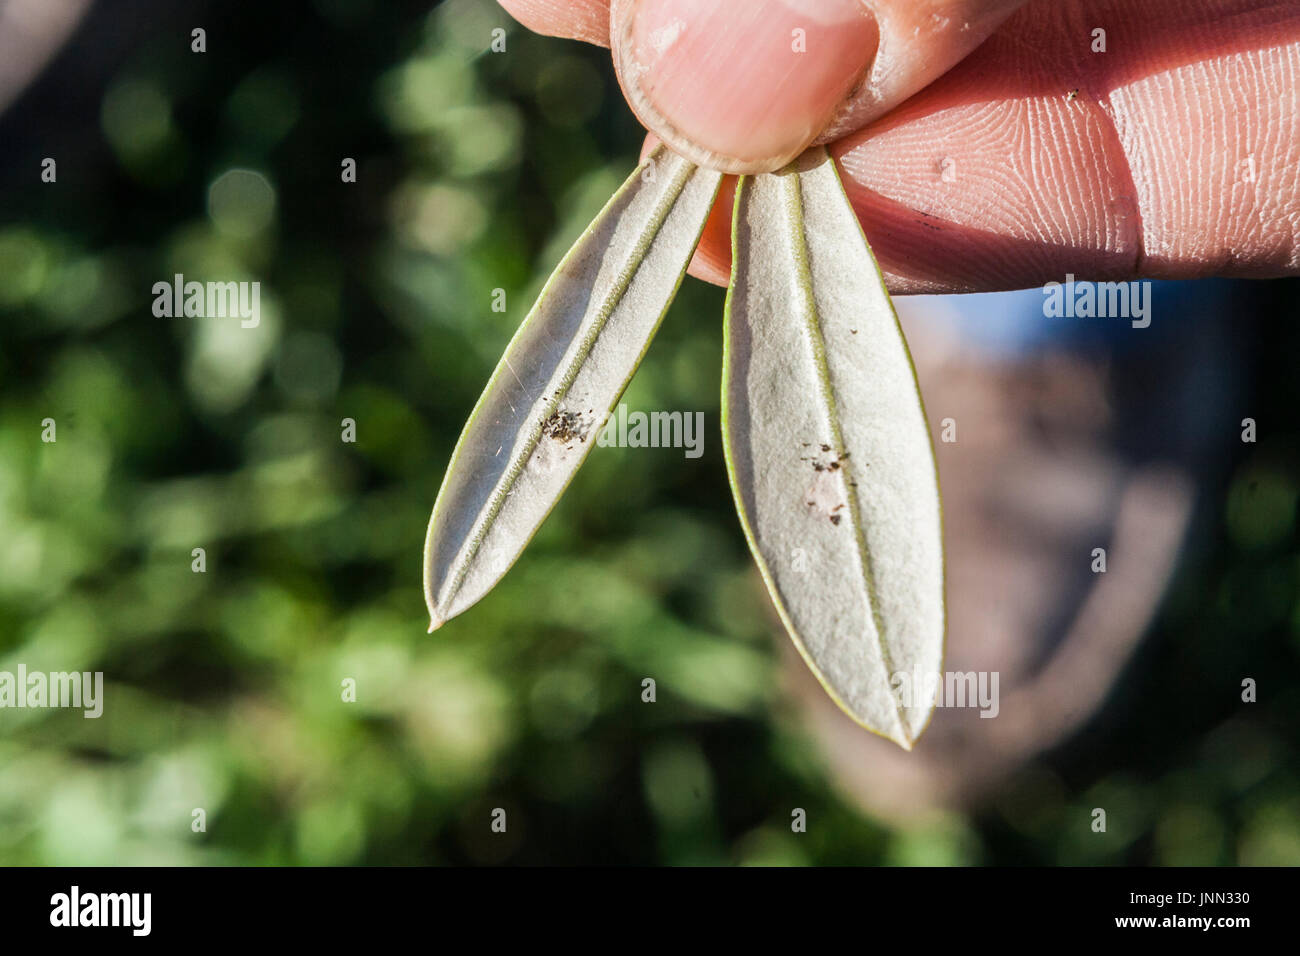 Farmer olive leaf in hand shows detail of infection call repilo, Jaen, Andalucia, Spain Stock Photo